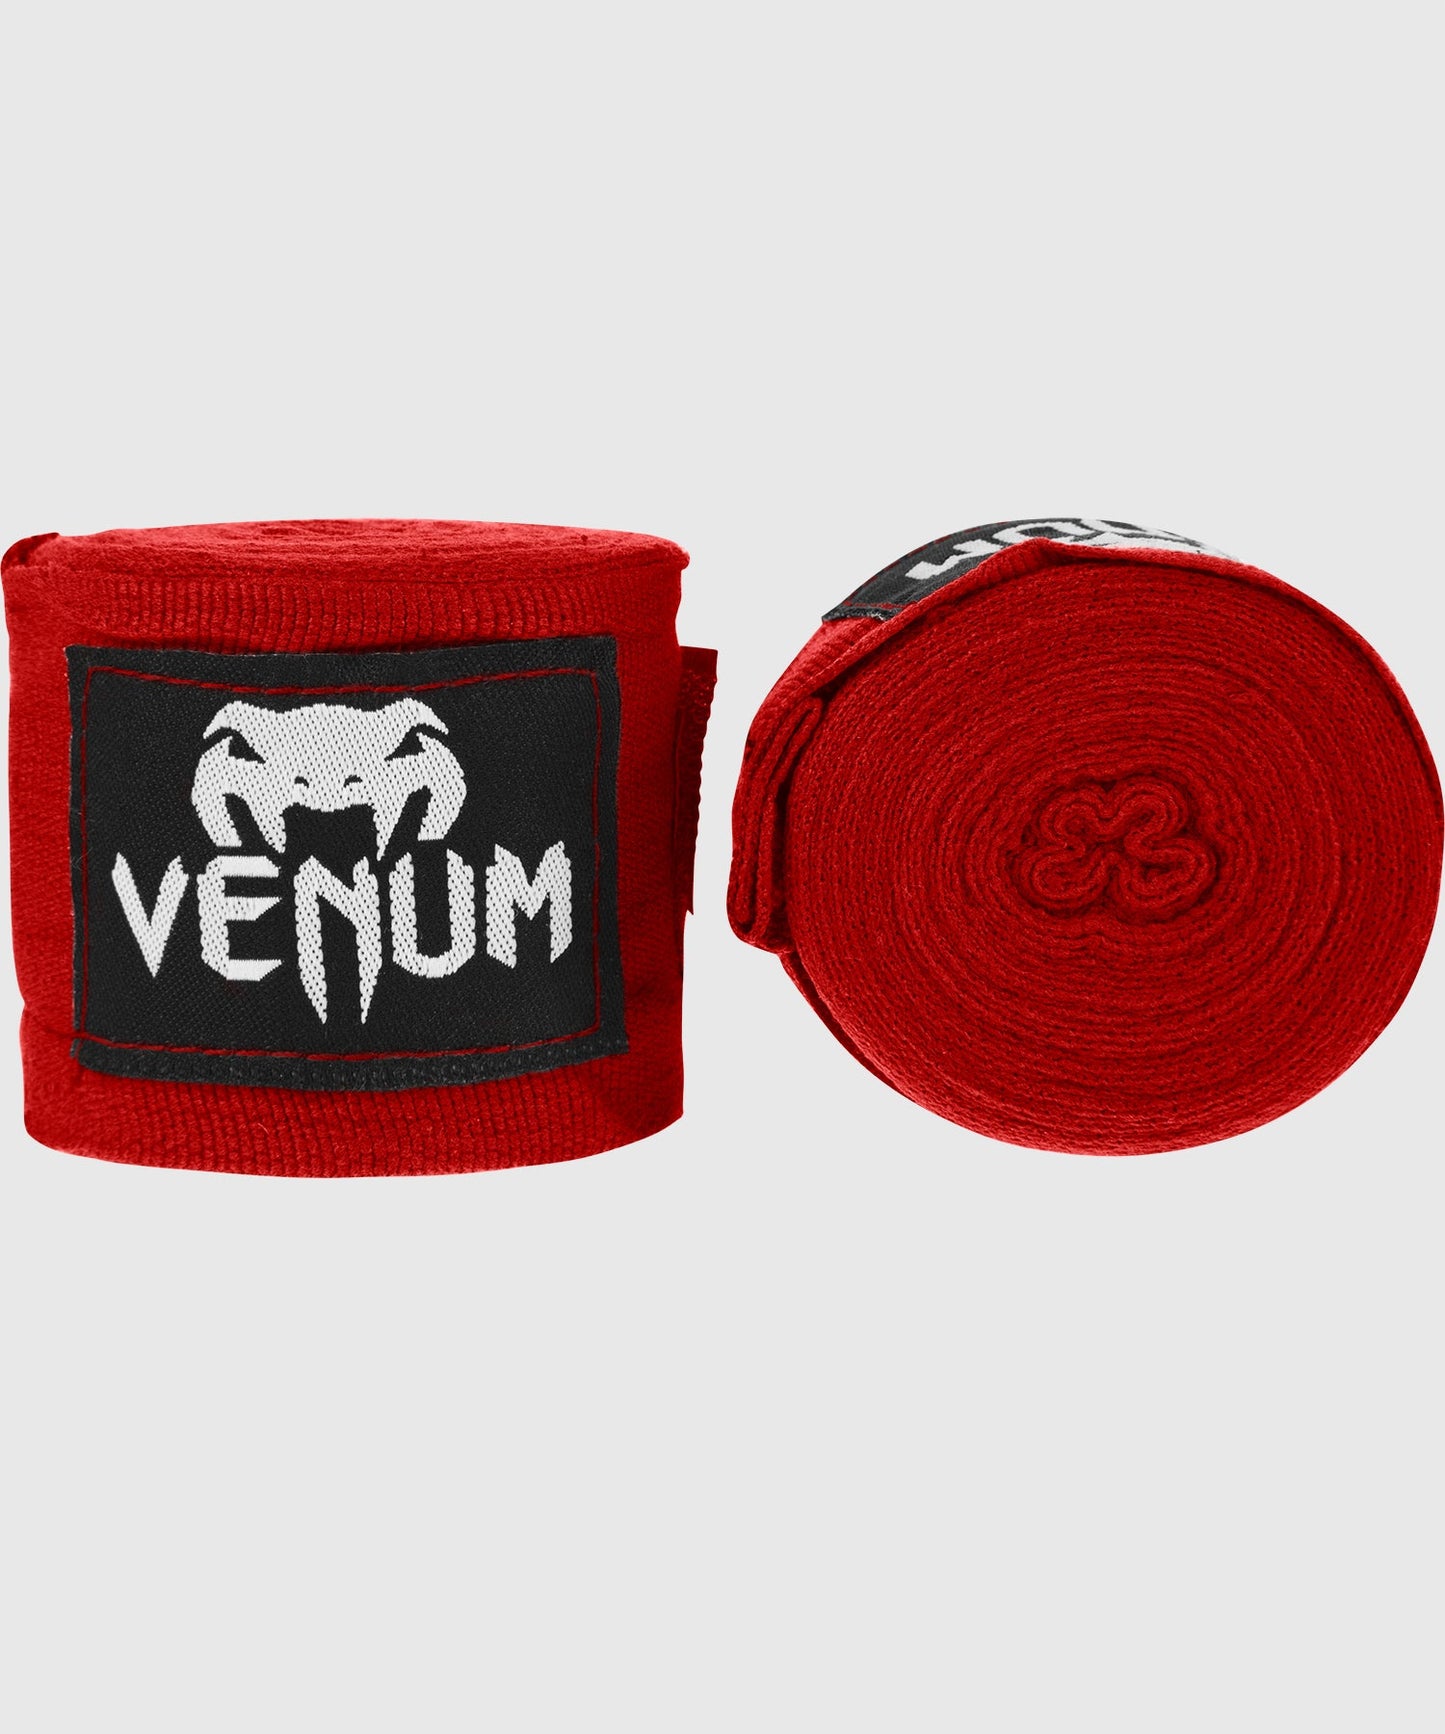 Venum Kontact Boxing Hand Wraps - Red - 180 in